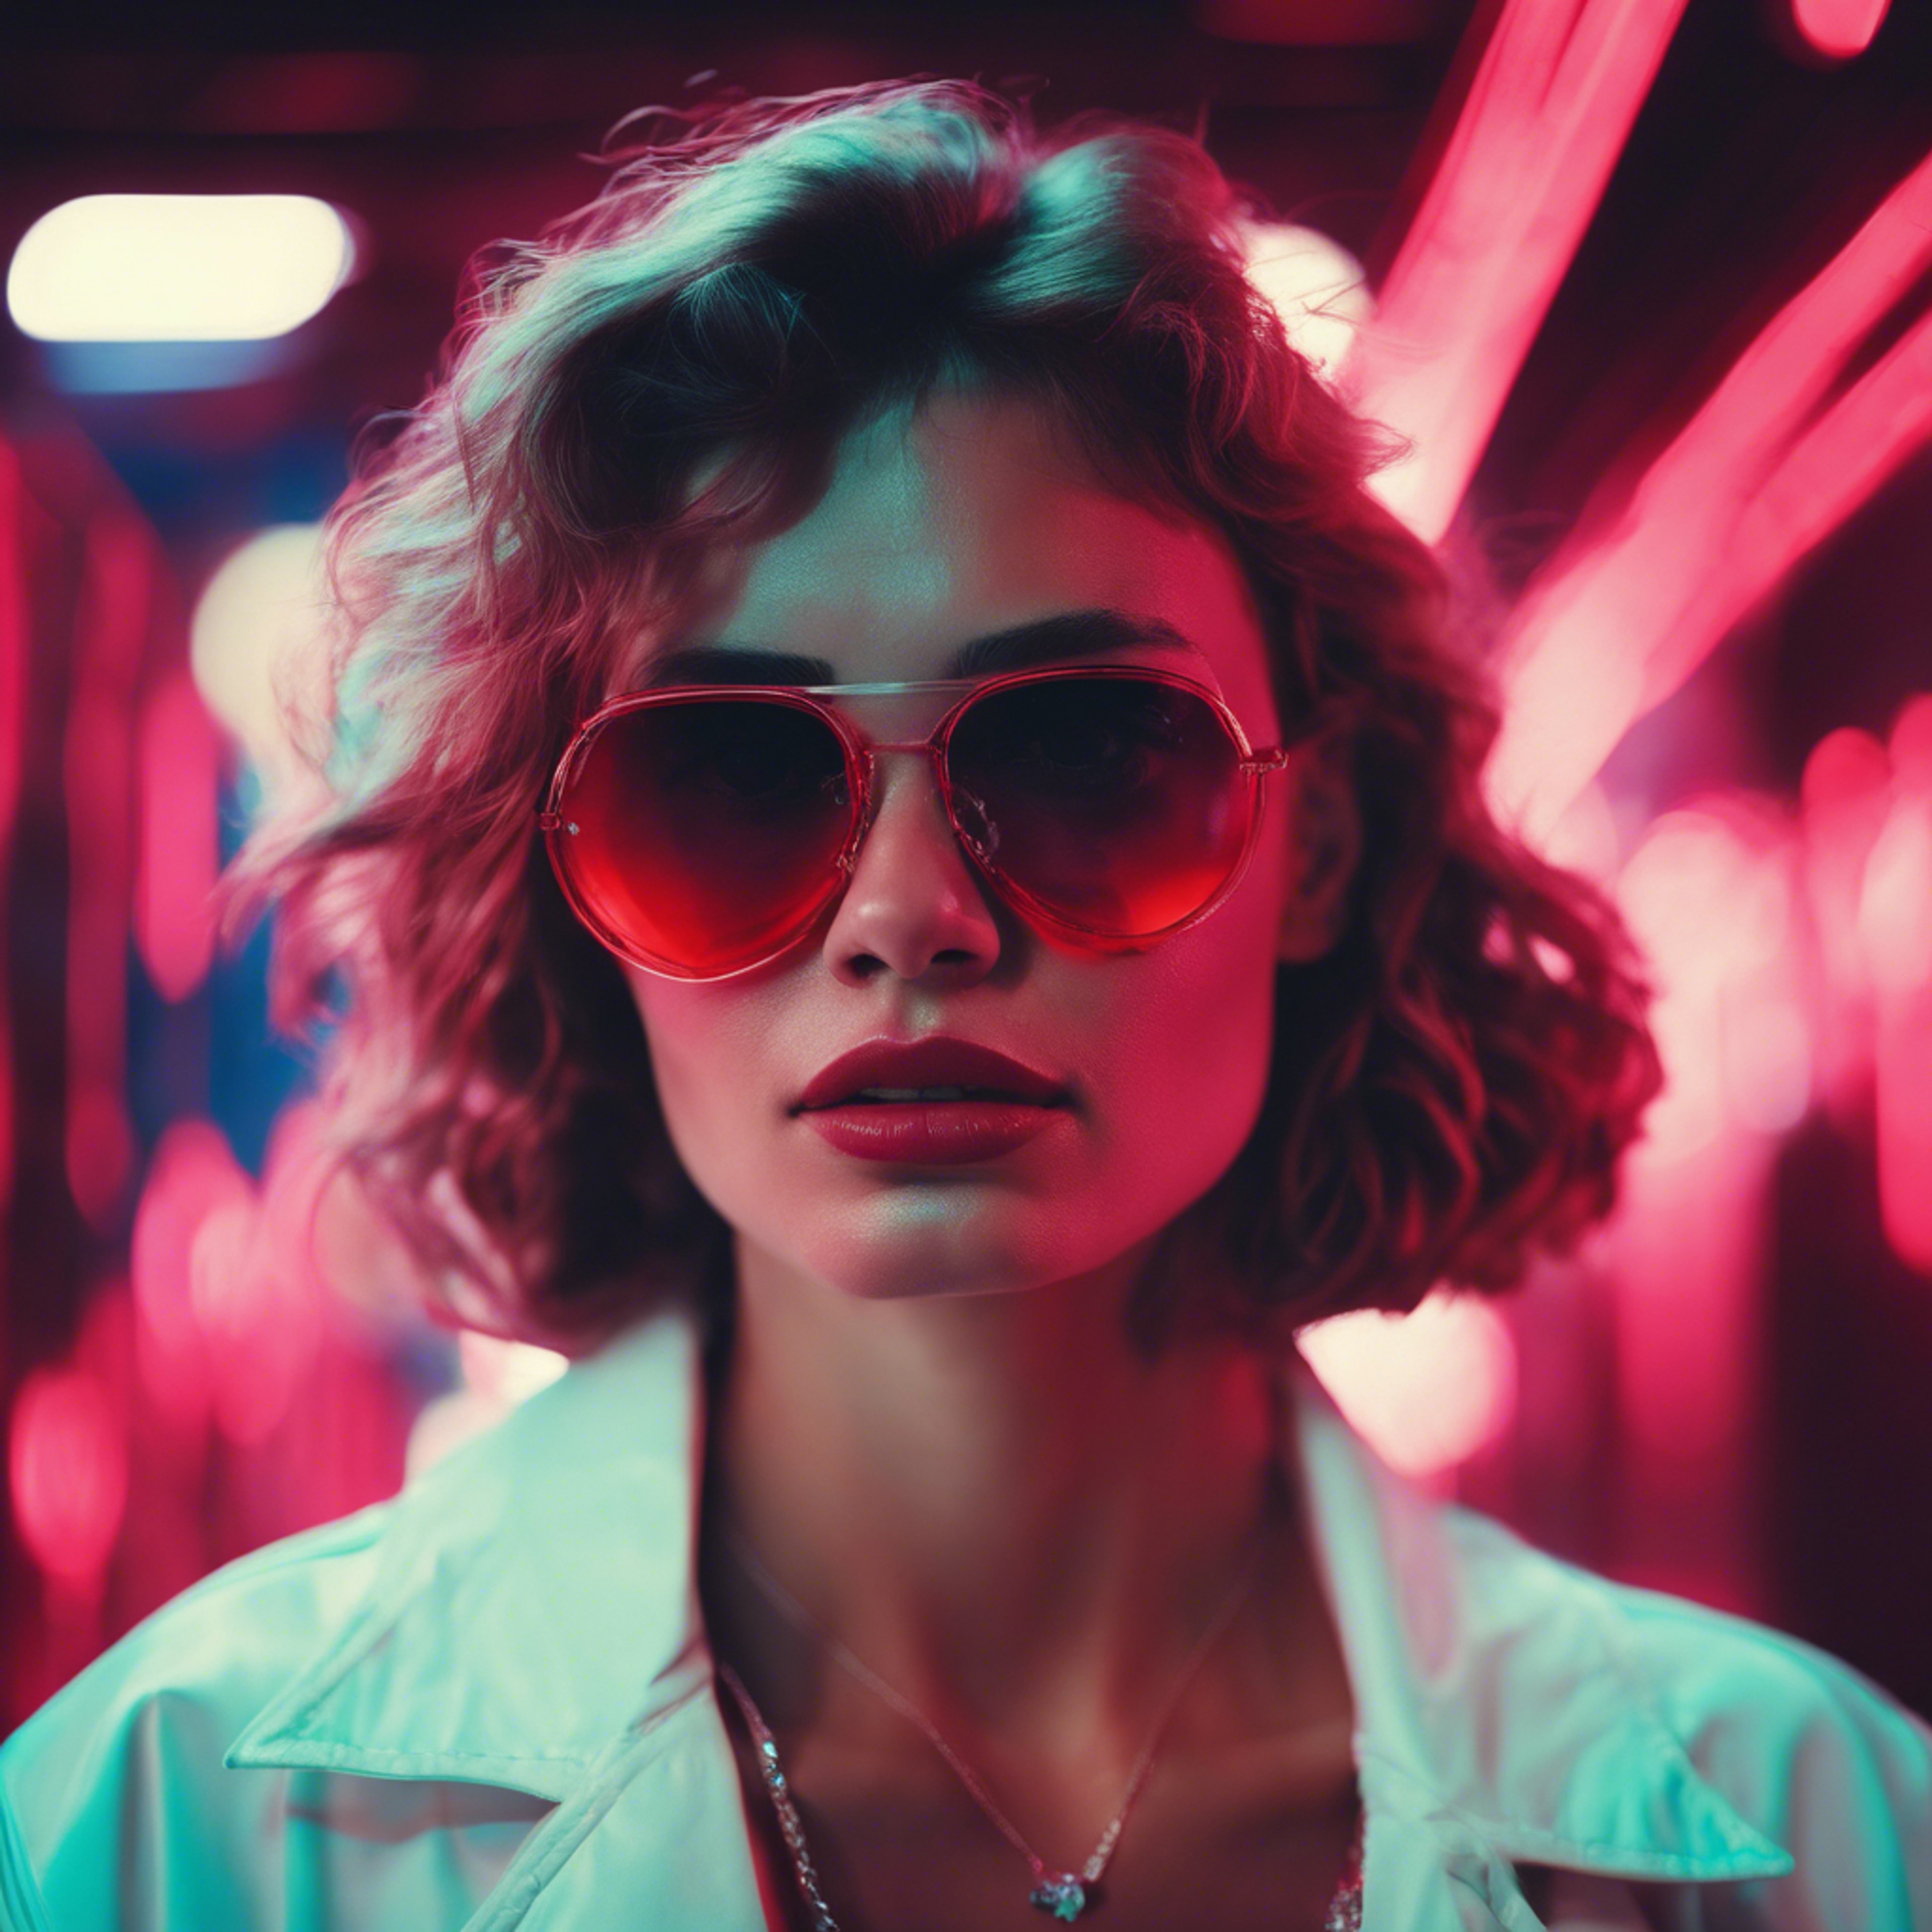 Retro 80's style portrait of a woman in sunglasses lit by cool red neon lights. Wallpaper[9fb655559f07479e9c29]